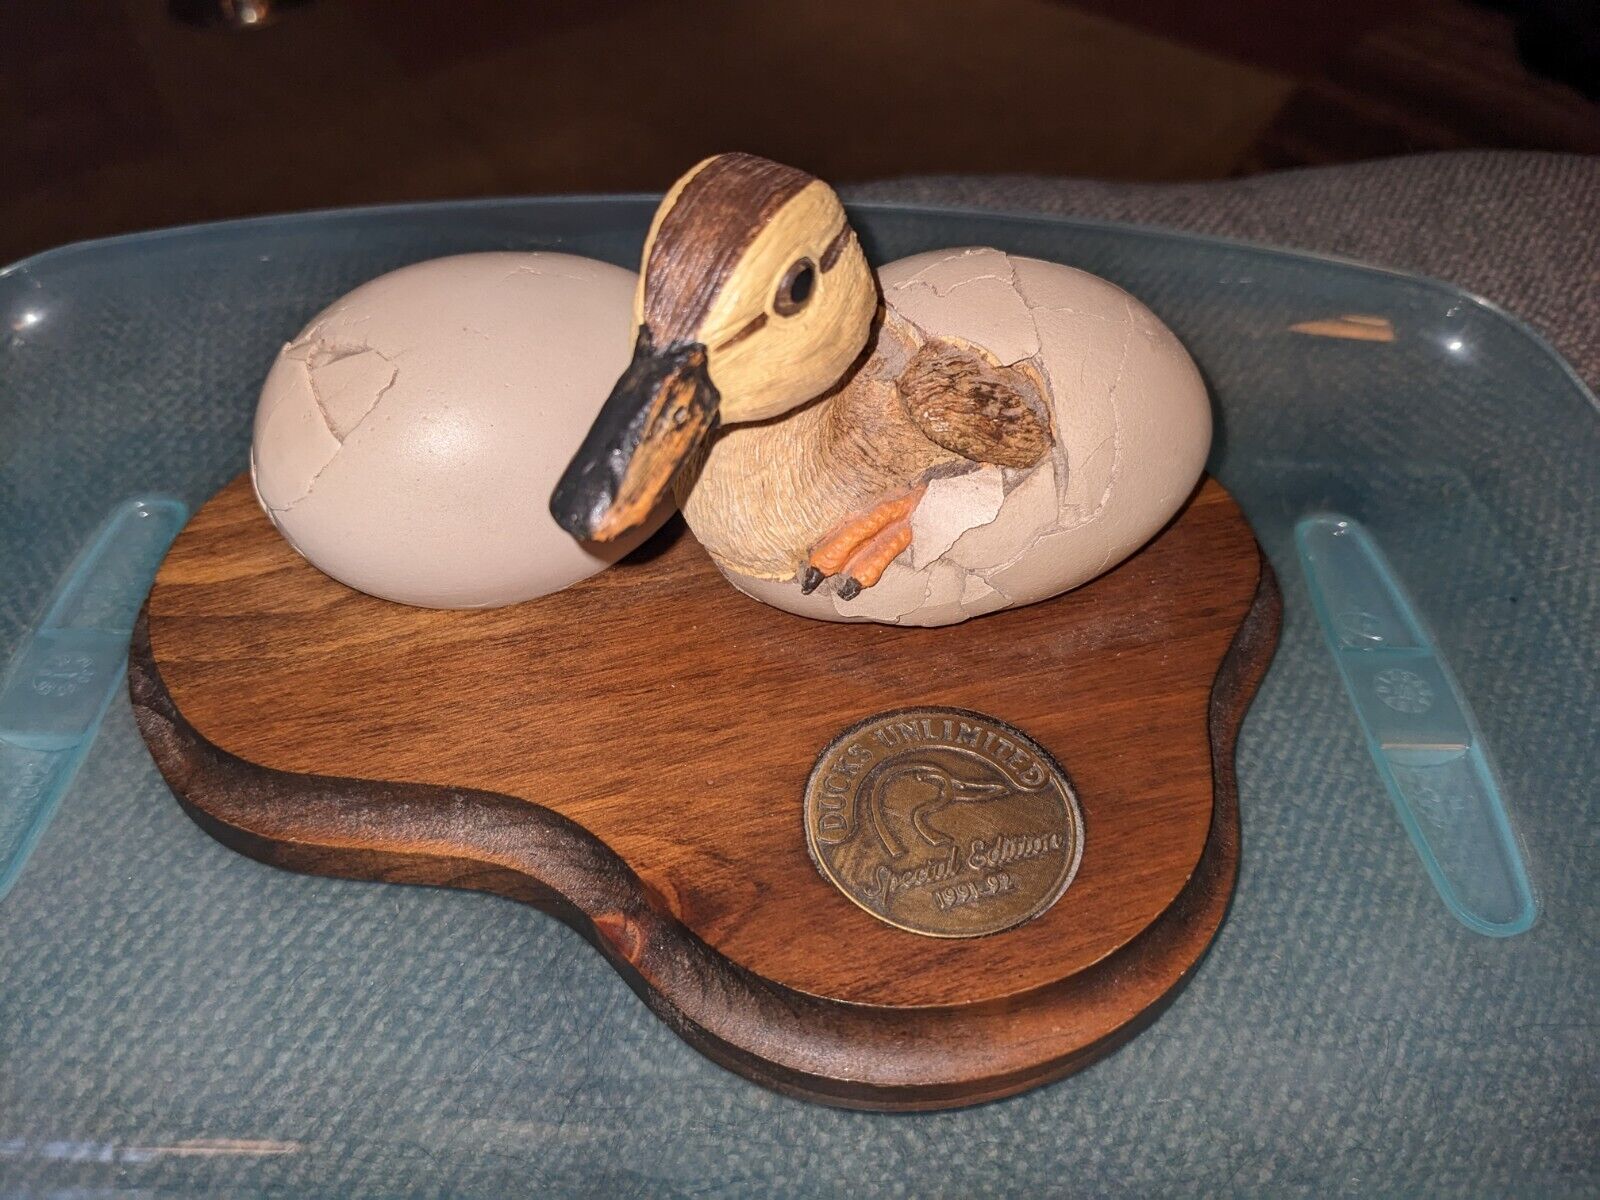 VTG. 1991-1992 Ducks Unlimited, Duck In Egg With Another Hatching Egg #1086